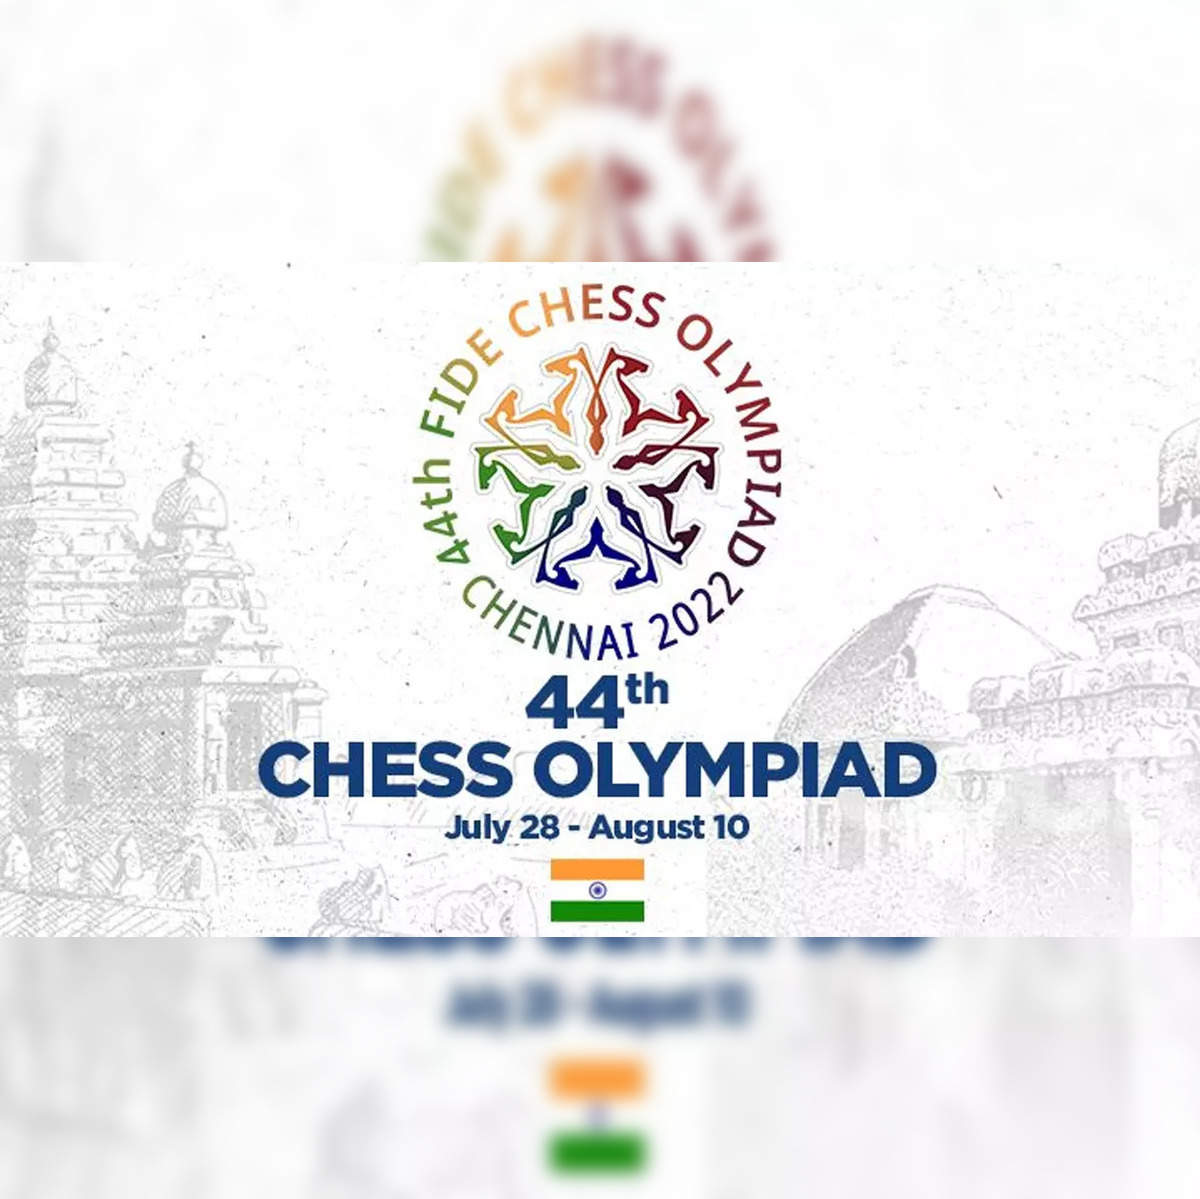 All eyes on India ahead of the 44th Chess Olympiad - Hindustan Times